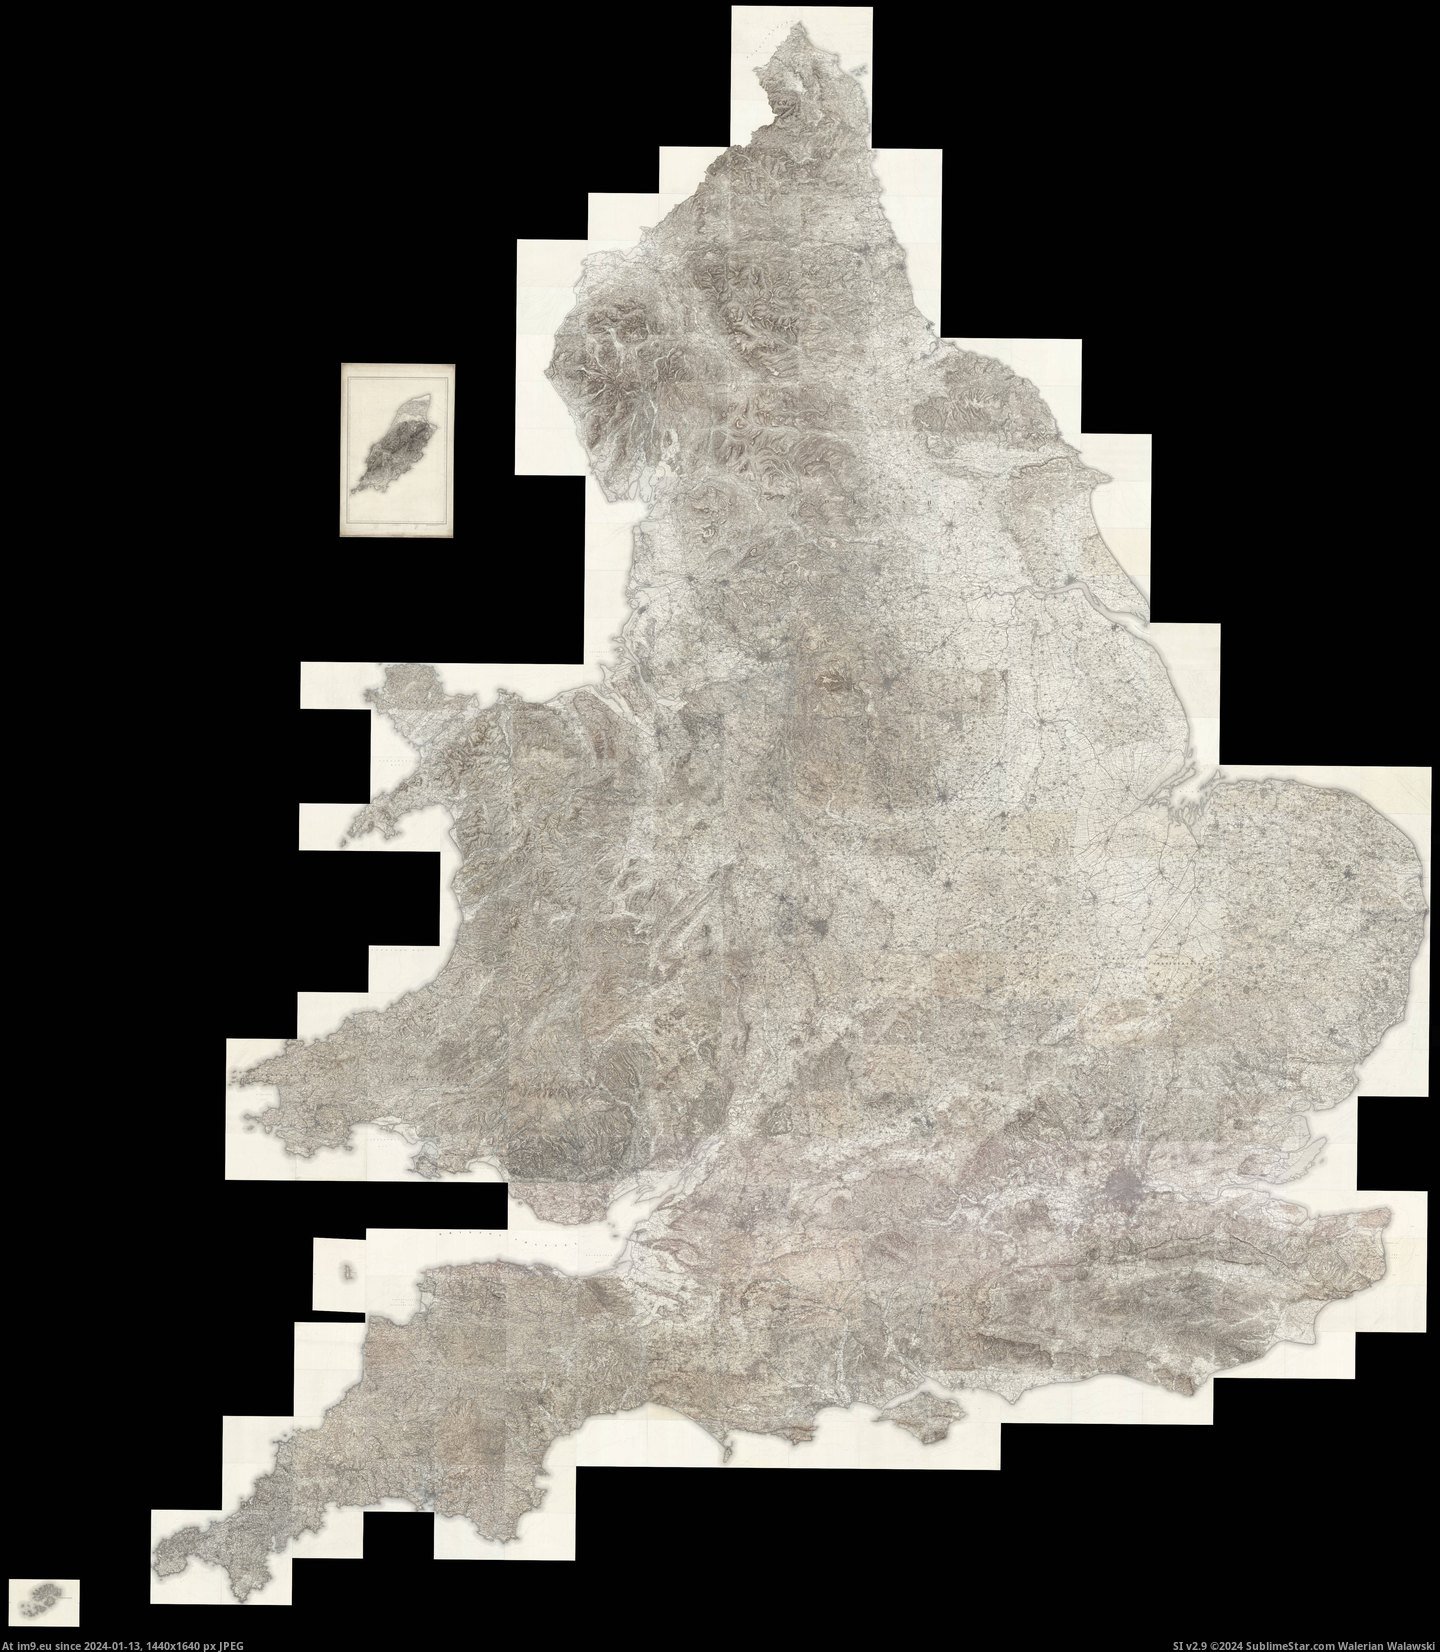 #High #Source #Map #Extremely #Composite #Zoomable #Seperate #England #Resolution #Maps [Mapporn] Composite map of England in 1900 made with 360 seperate maps. (Extremely high resolution zoomable source in comments,  Pic. (Изображение из альбом My r/MAPS favs))